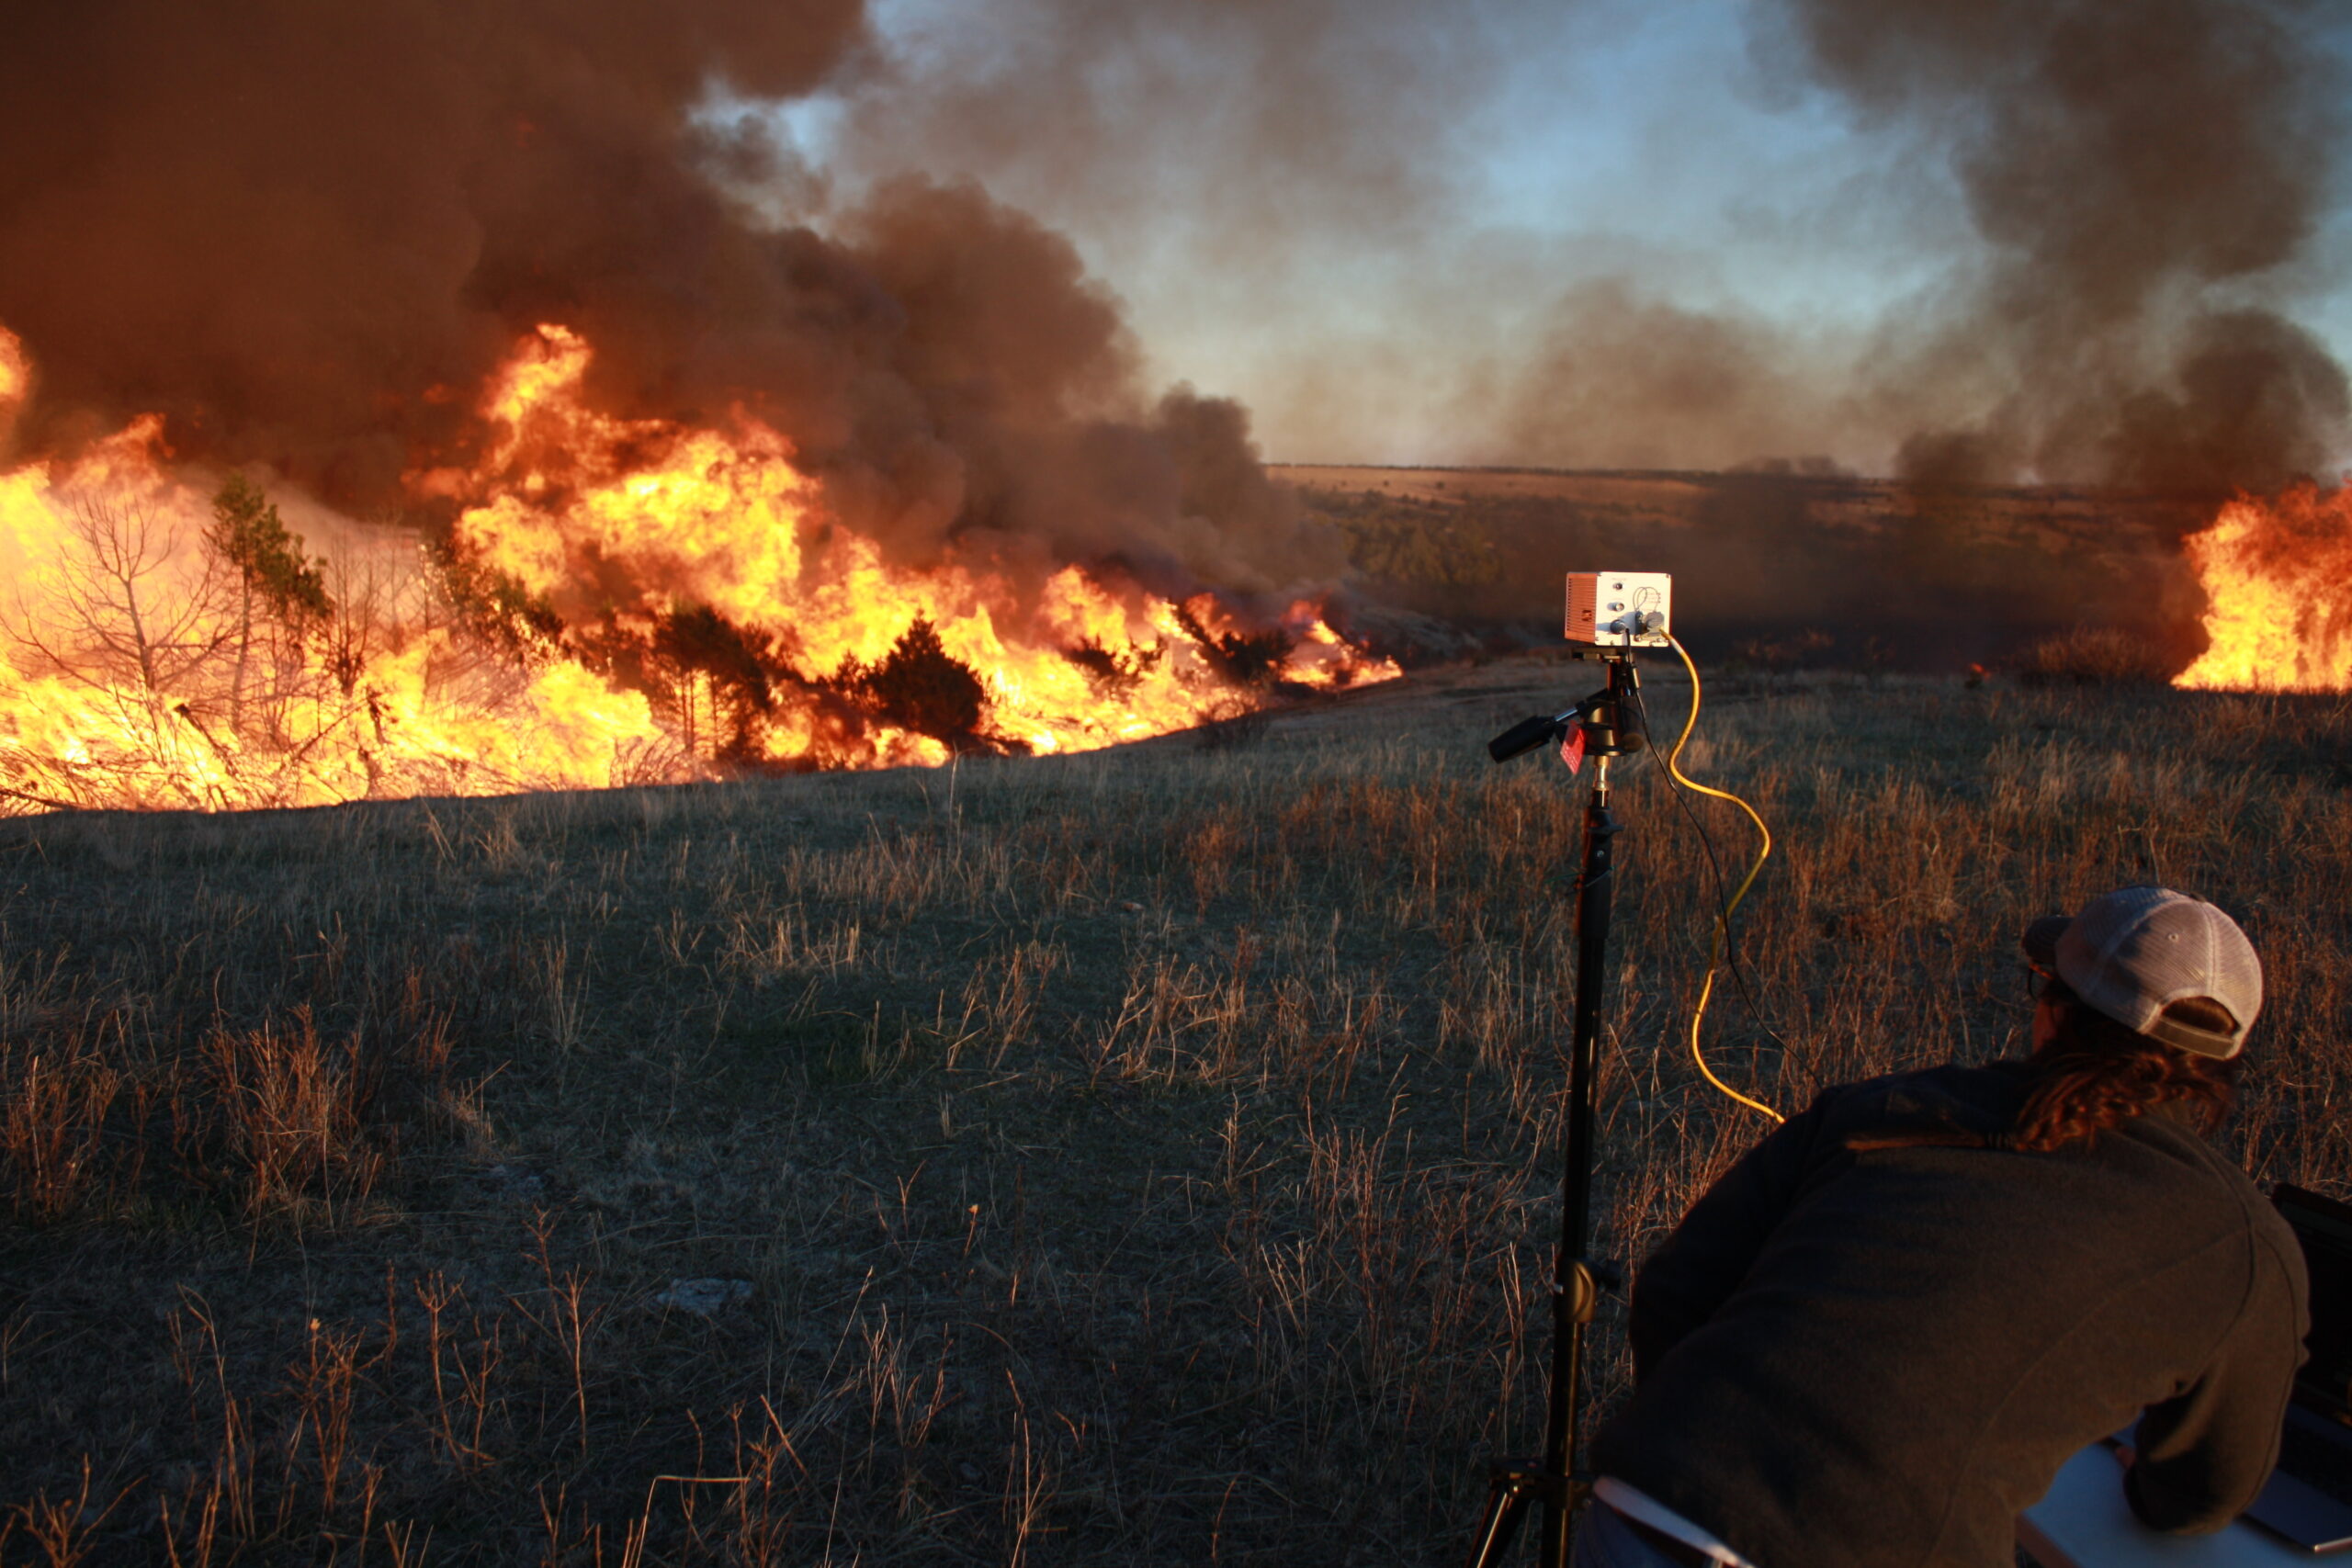 Drones Drop Fire Balls To Ignite Extreme Controlled Burns